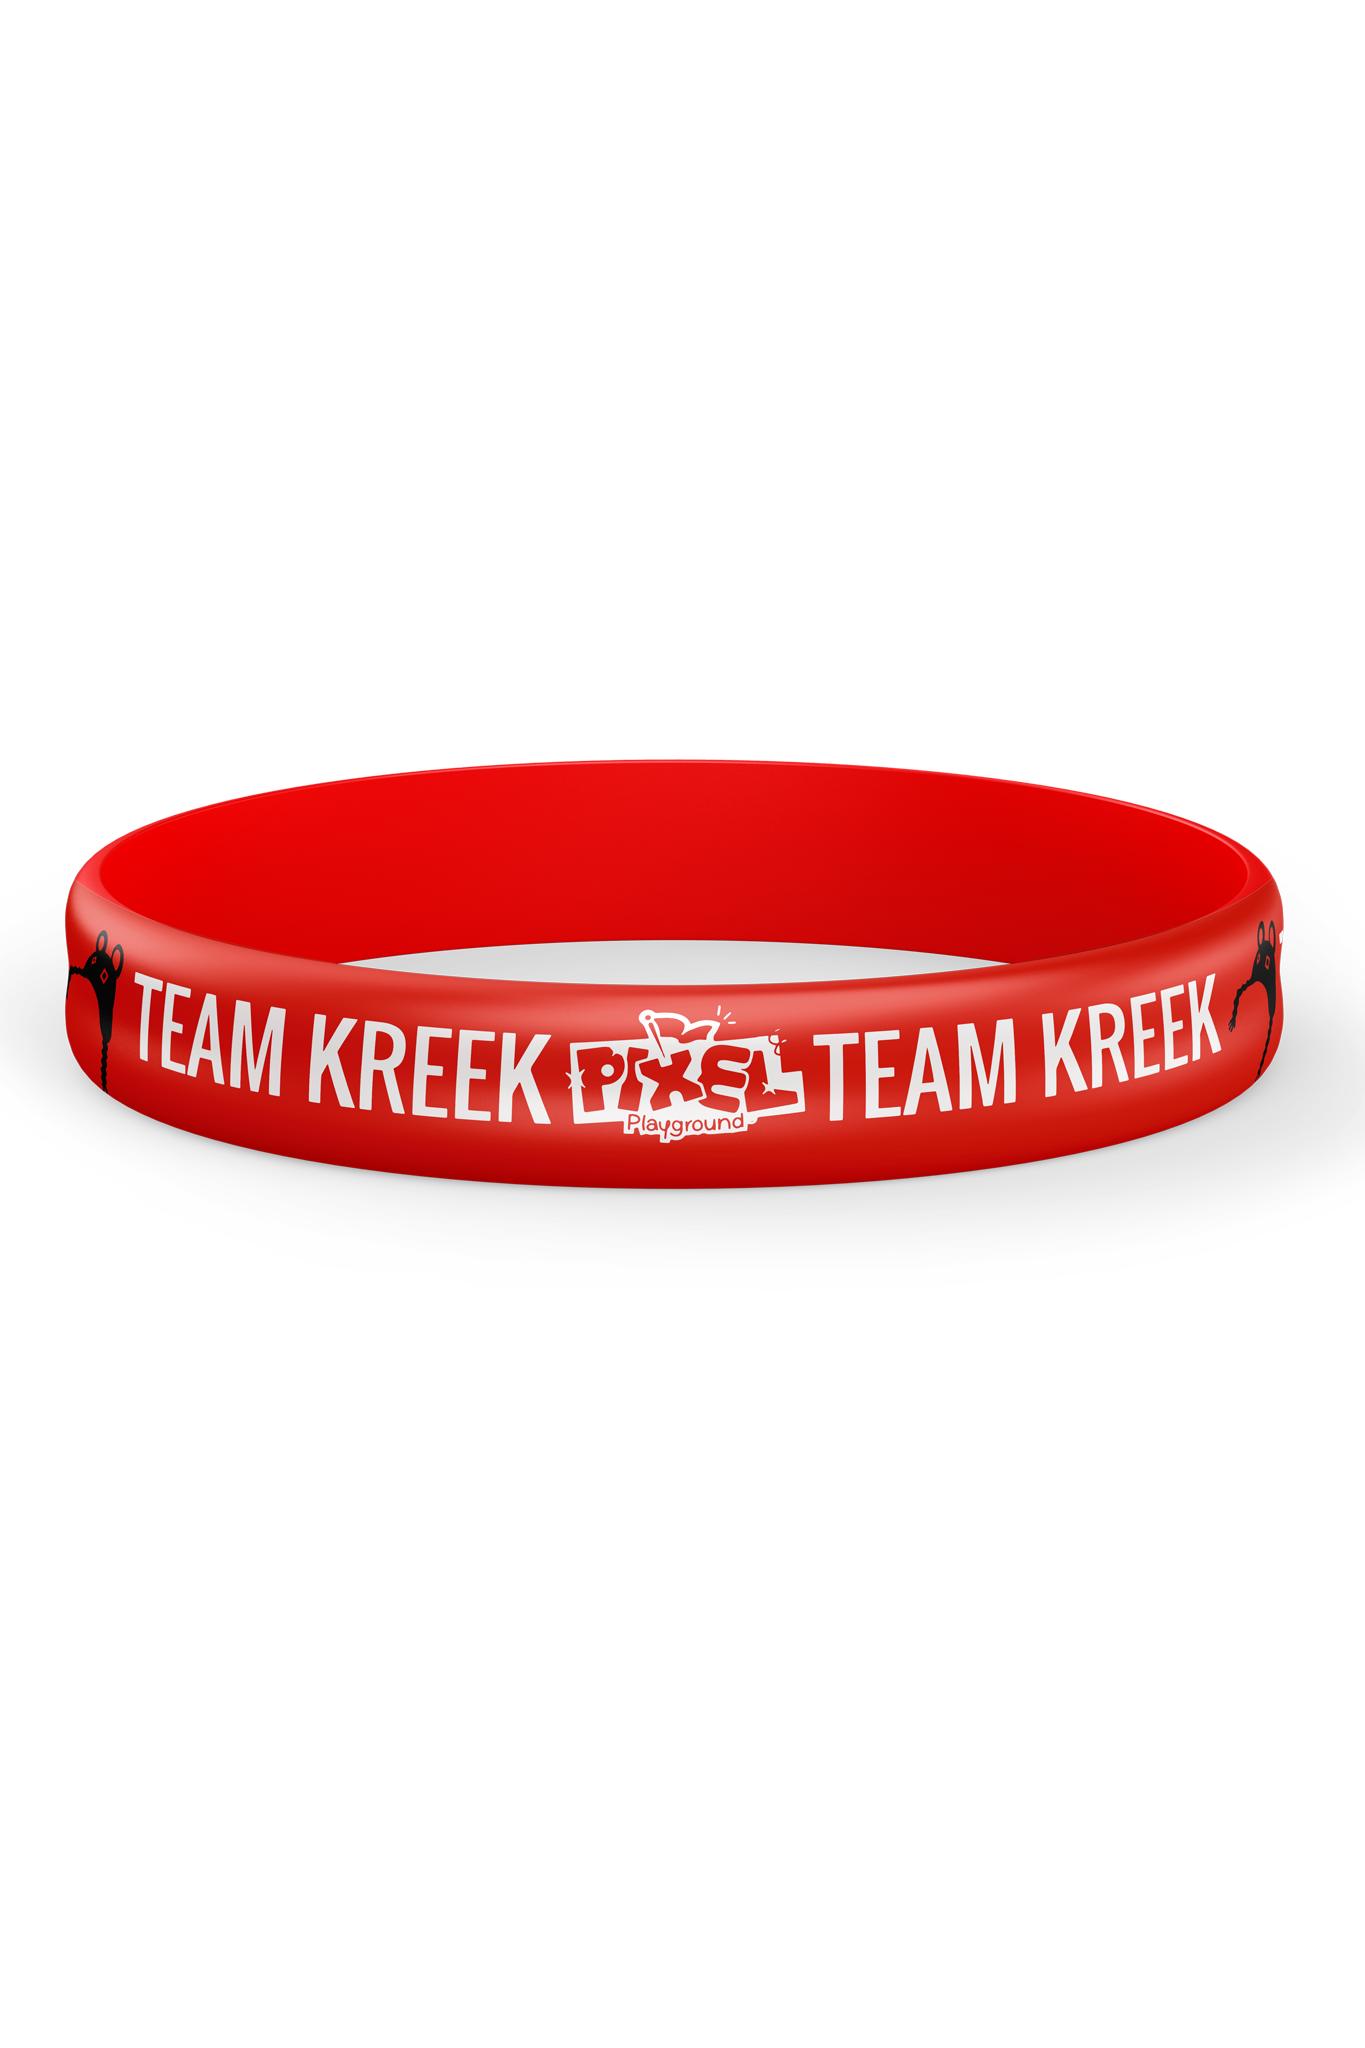 Red wristband with 'TEAM KREEK' text and Pixel Playground logo.